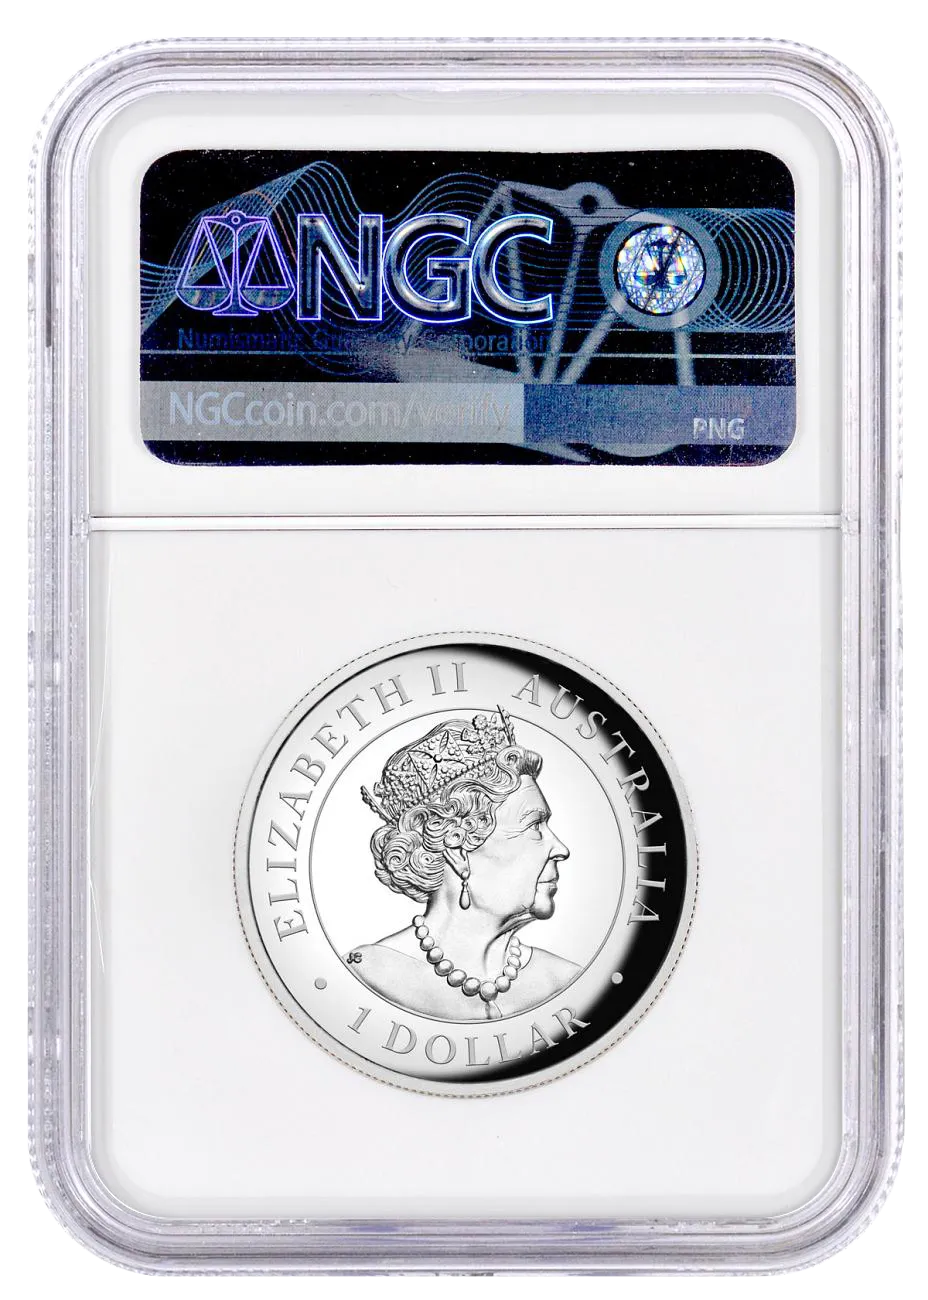 2022 P $1 Australia 1oz Proof Silver Wedge Tailed Eagle Ultra High Relief NGC PF70UC First Day of Issue Mercanti Signed